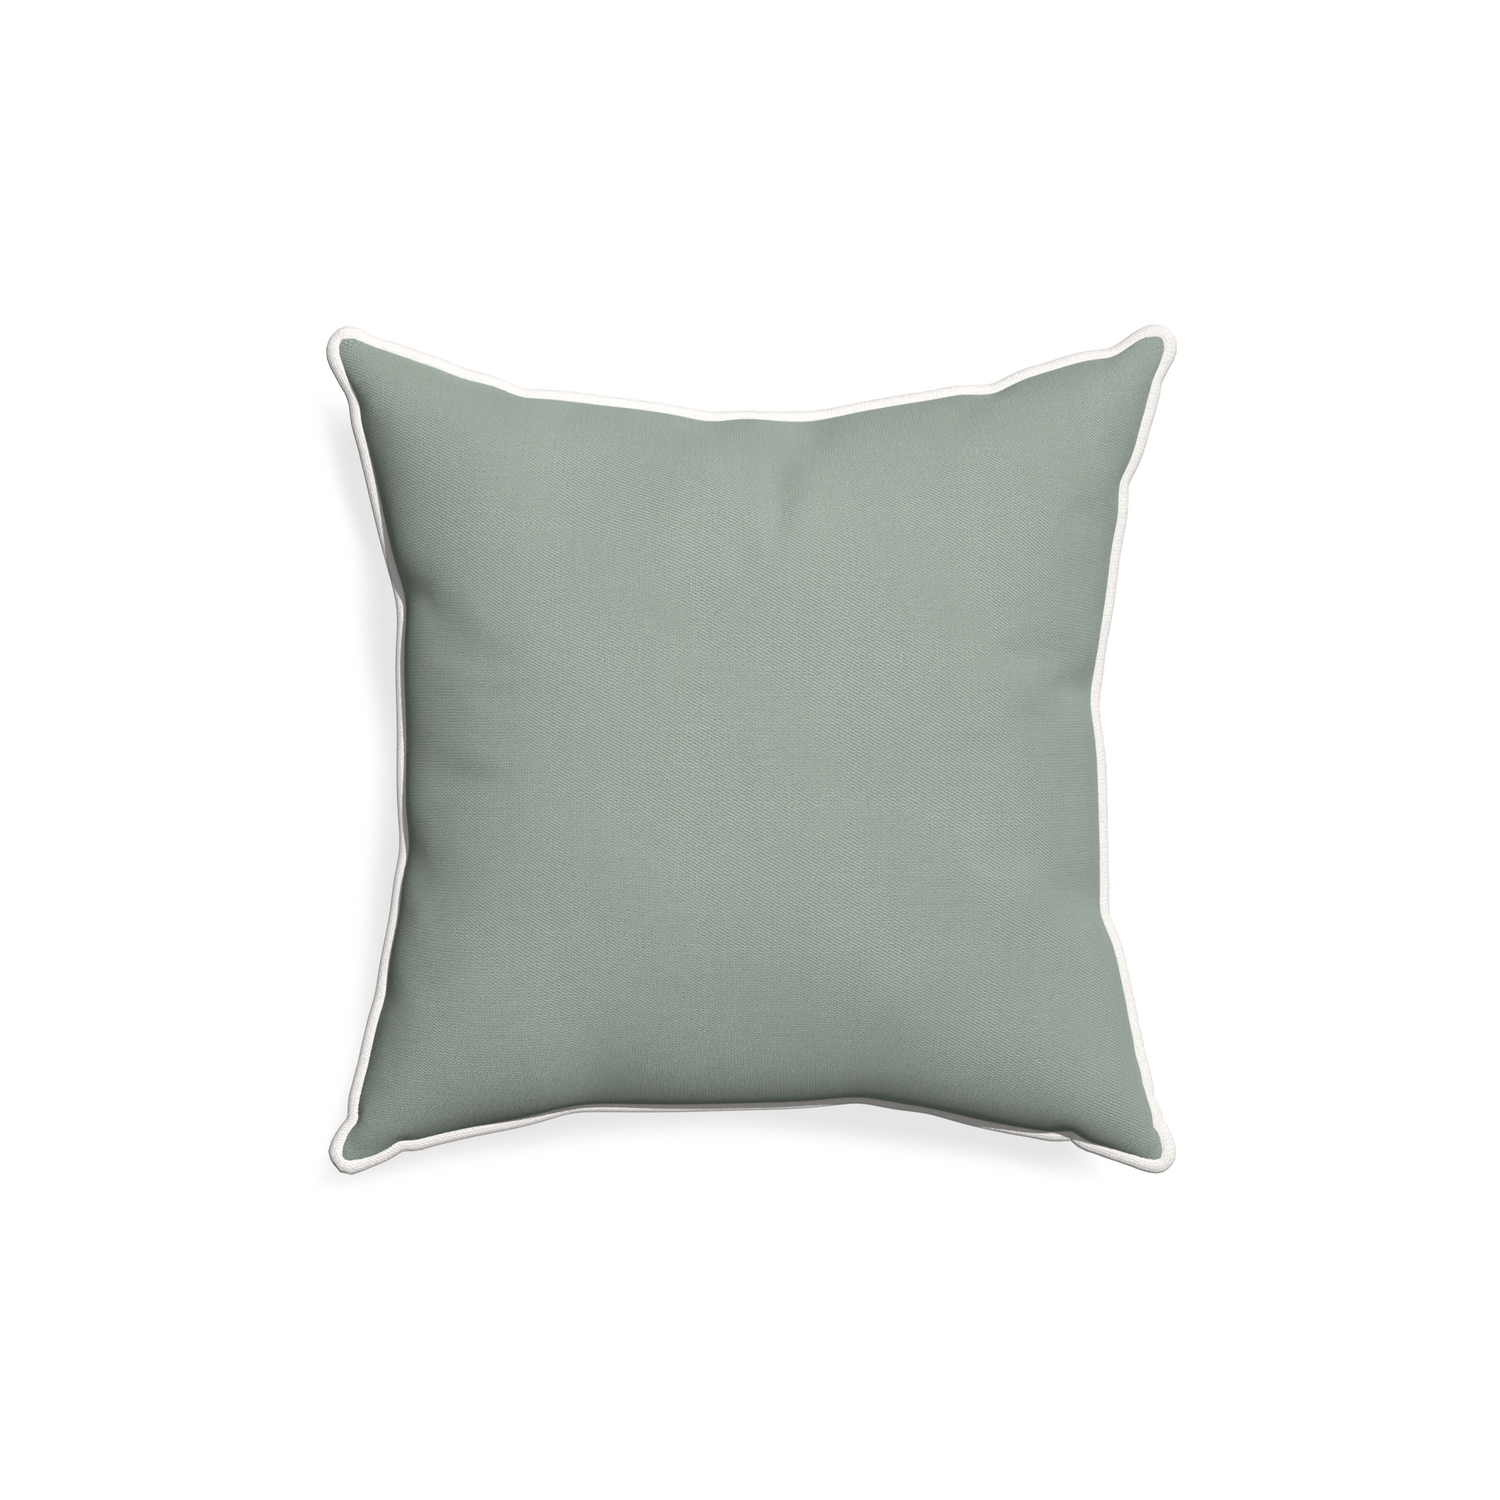 18-square sage custom sage green cottonpillow with snow piping on white background